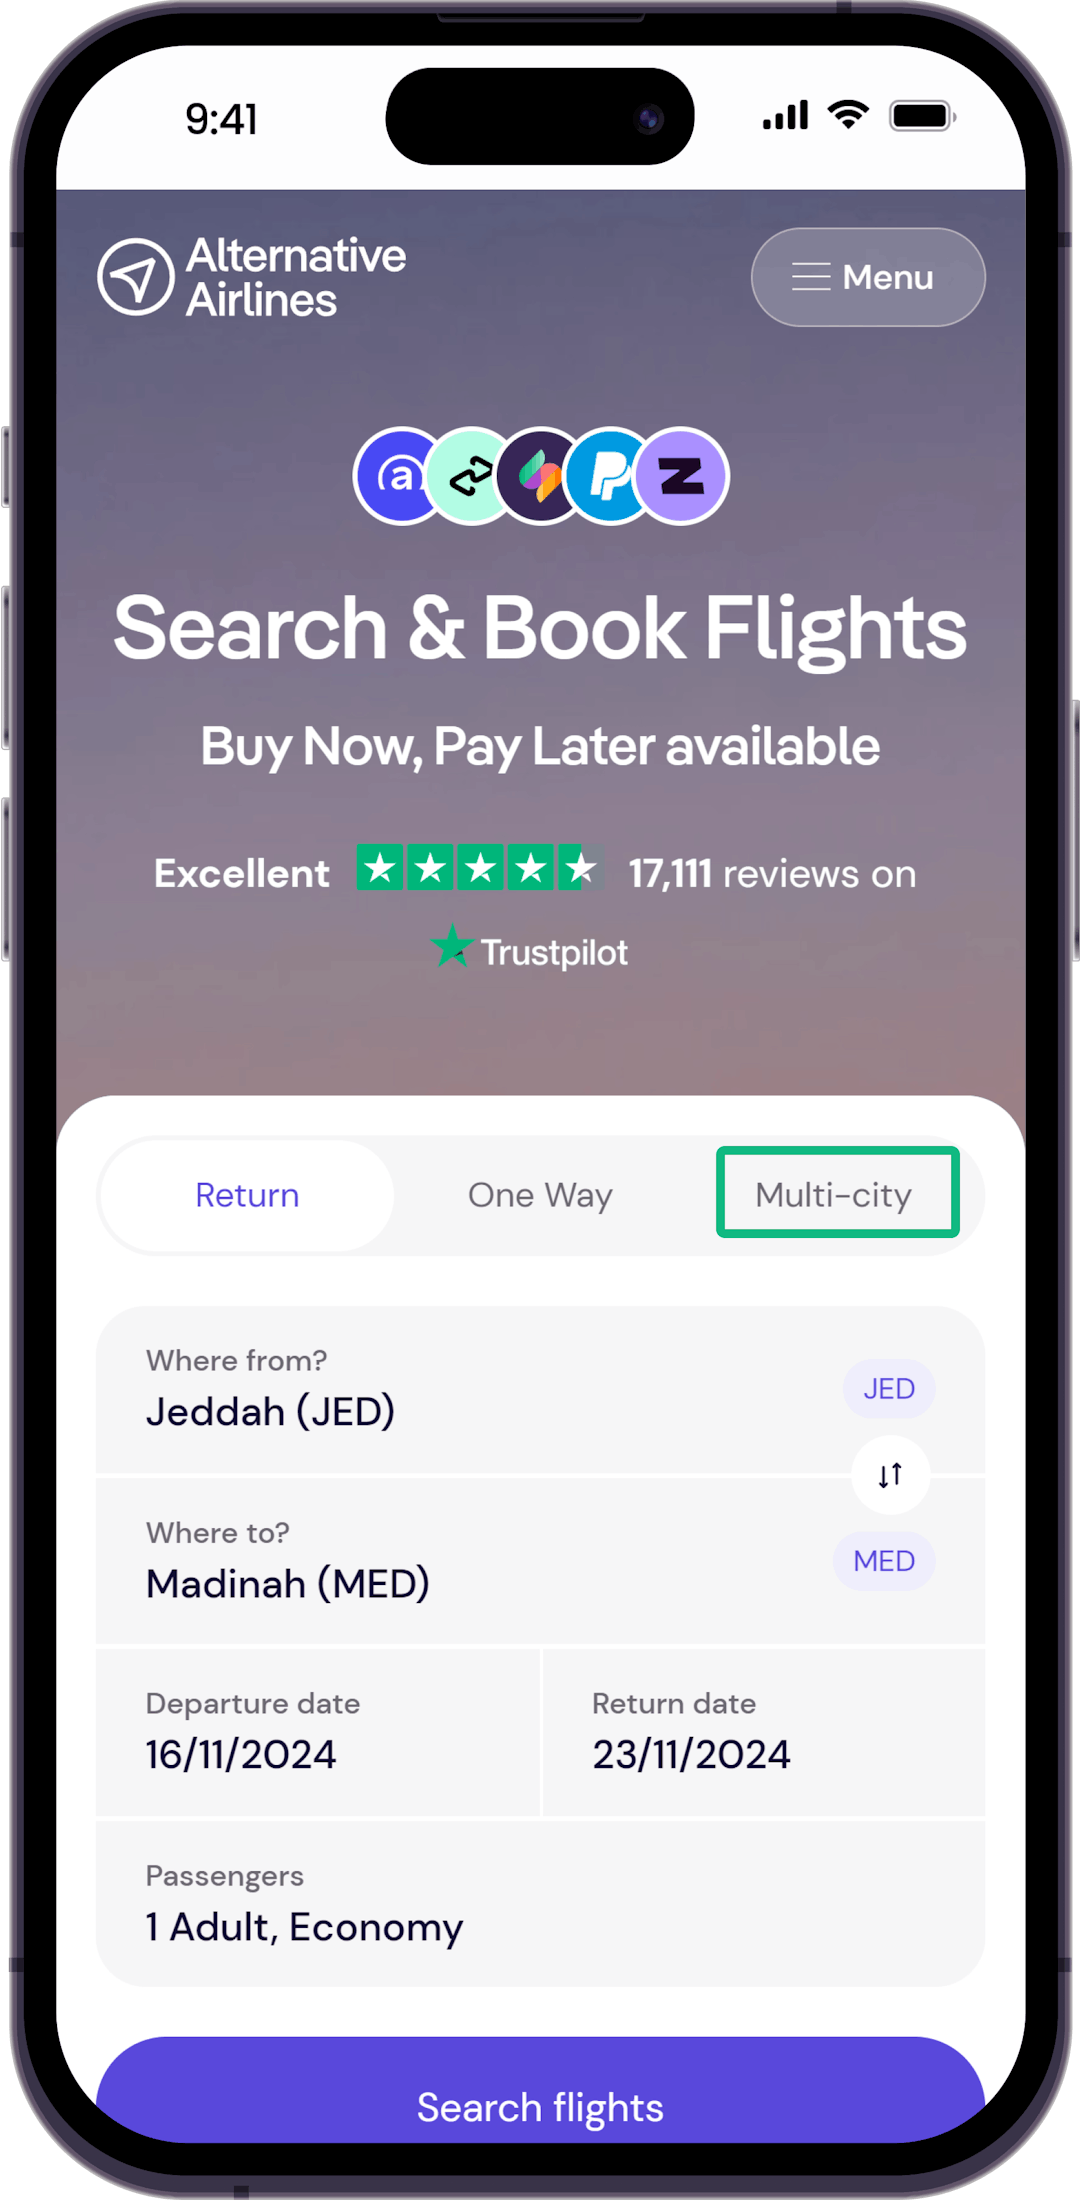 Step 1: Select multi-city option in search form